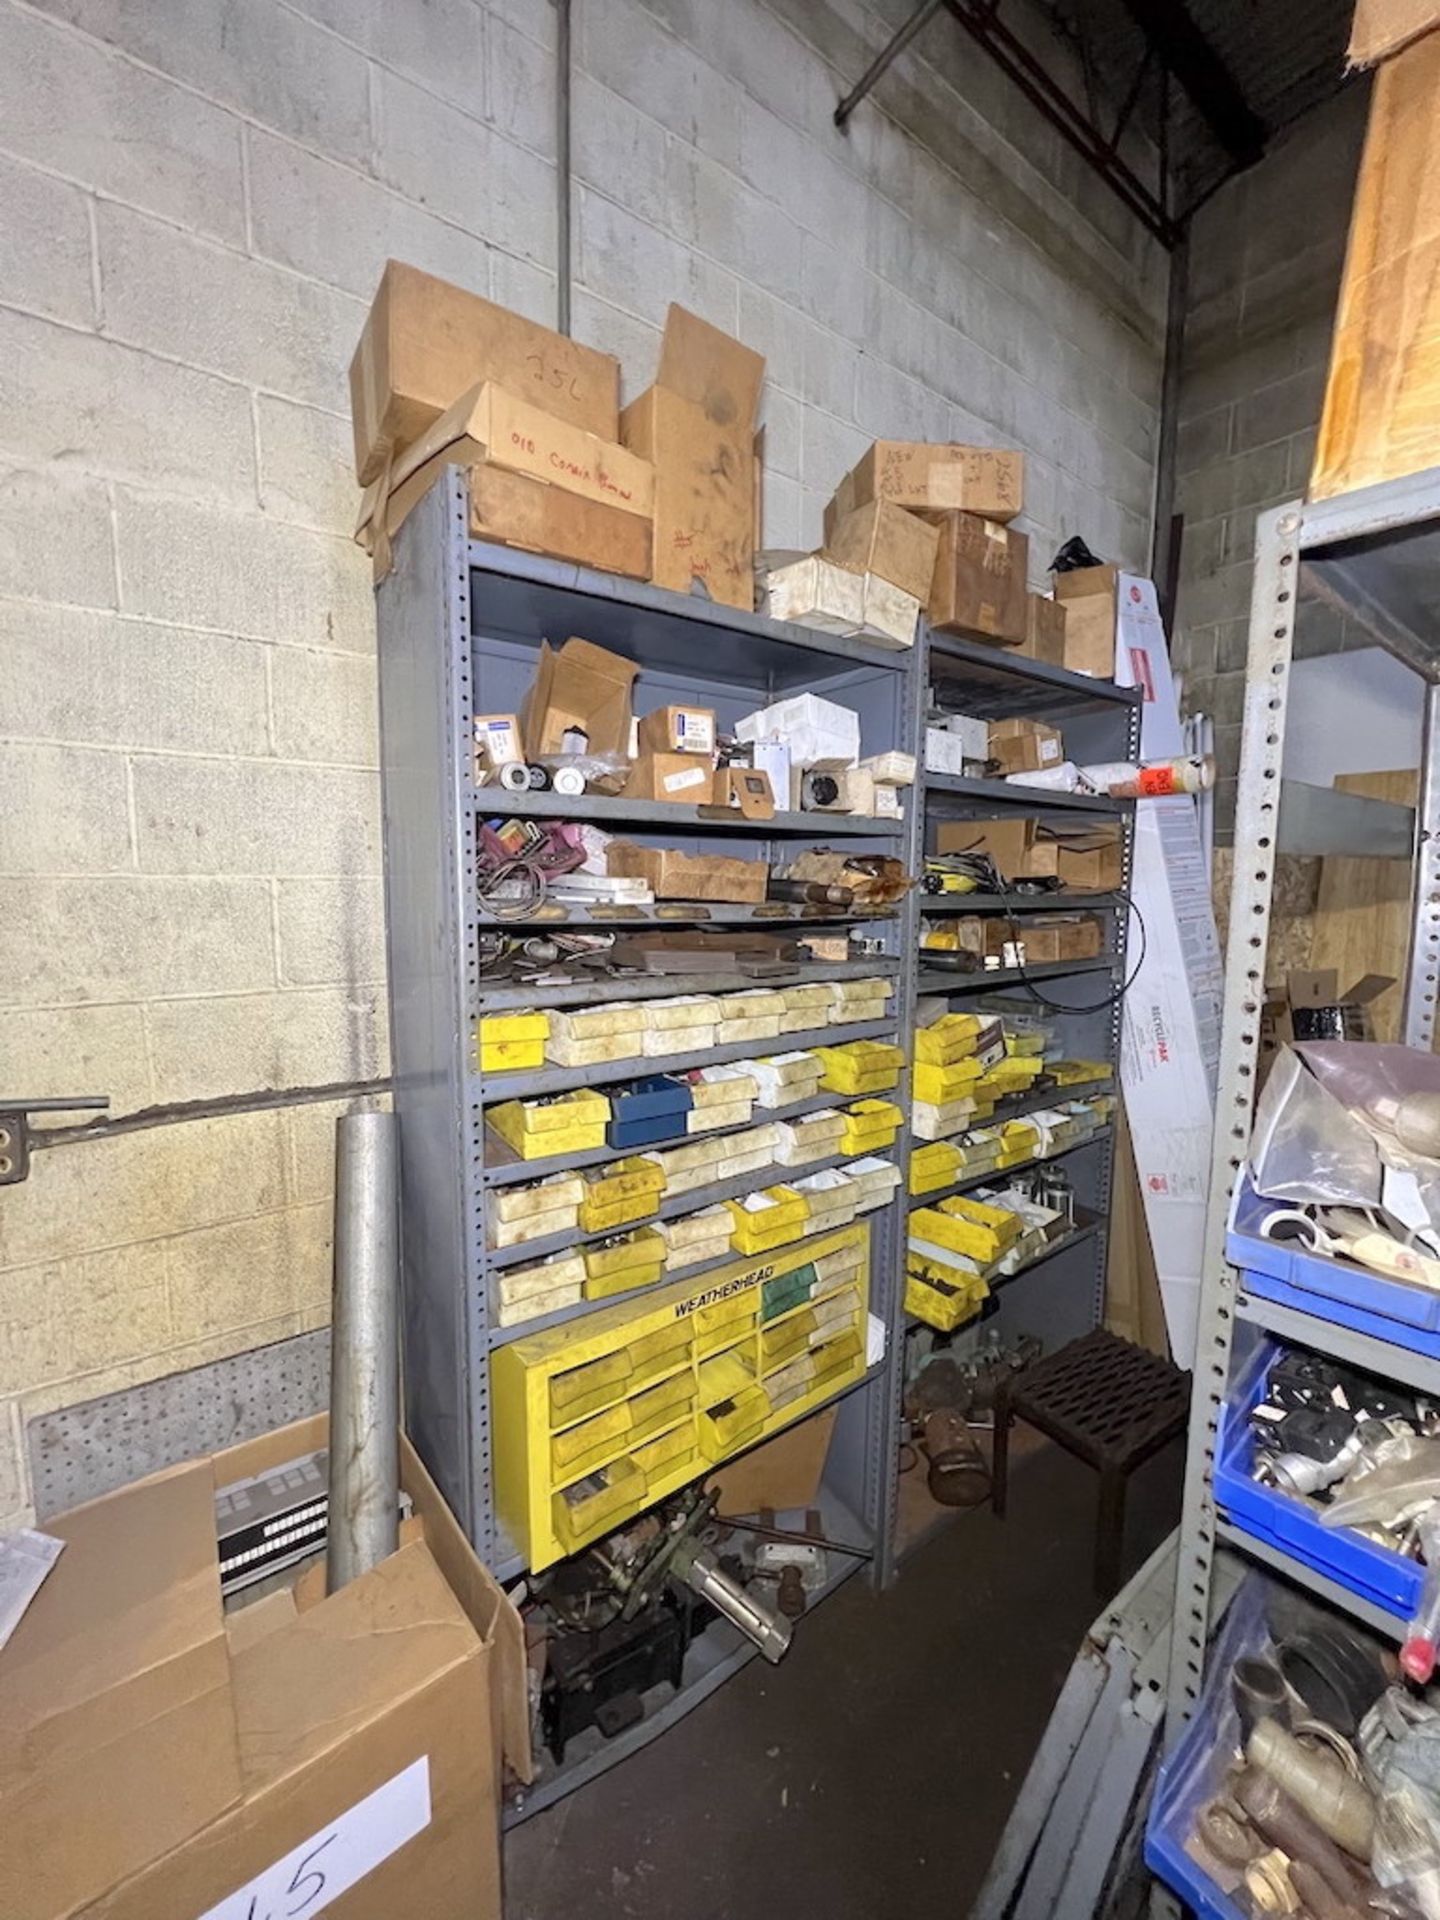 Remaining Contents of Parts Room - Image 25 of 60